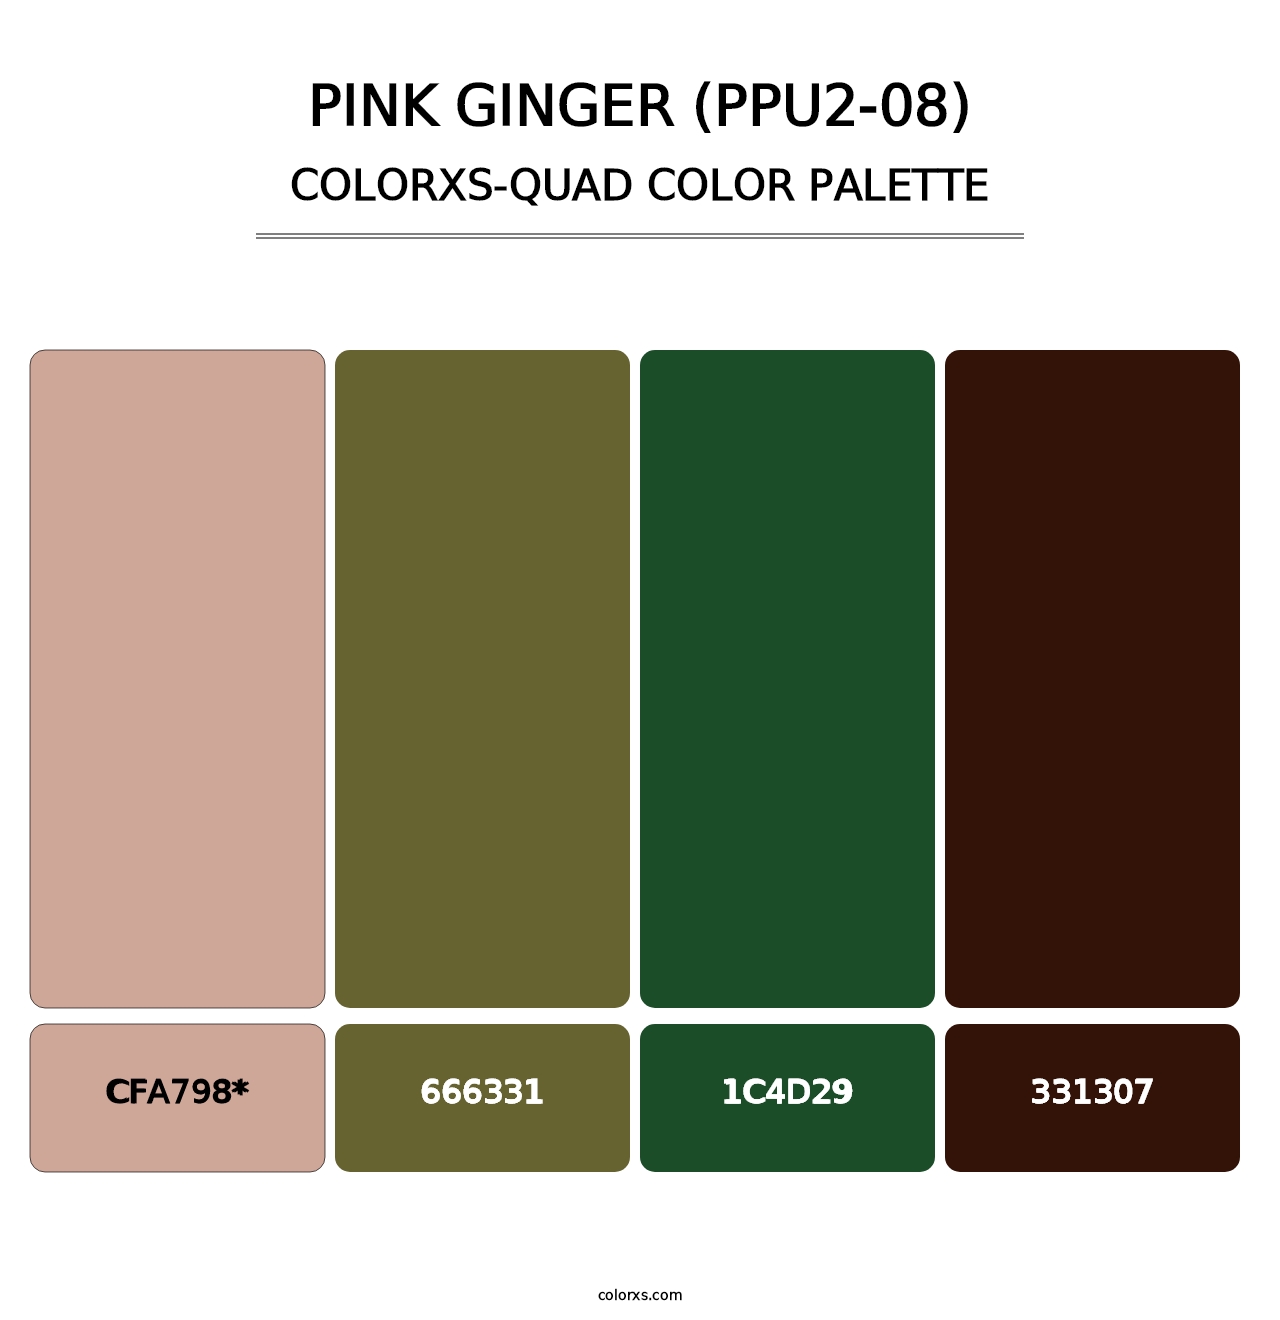 Pink Ginger (PPU2-08) - Colorxs Quad Palette